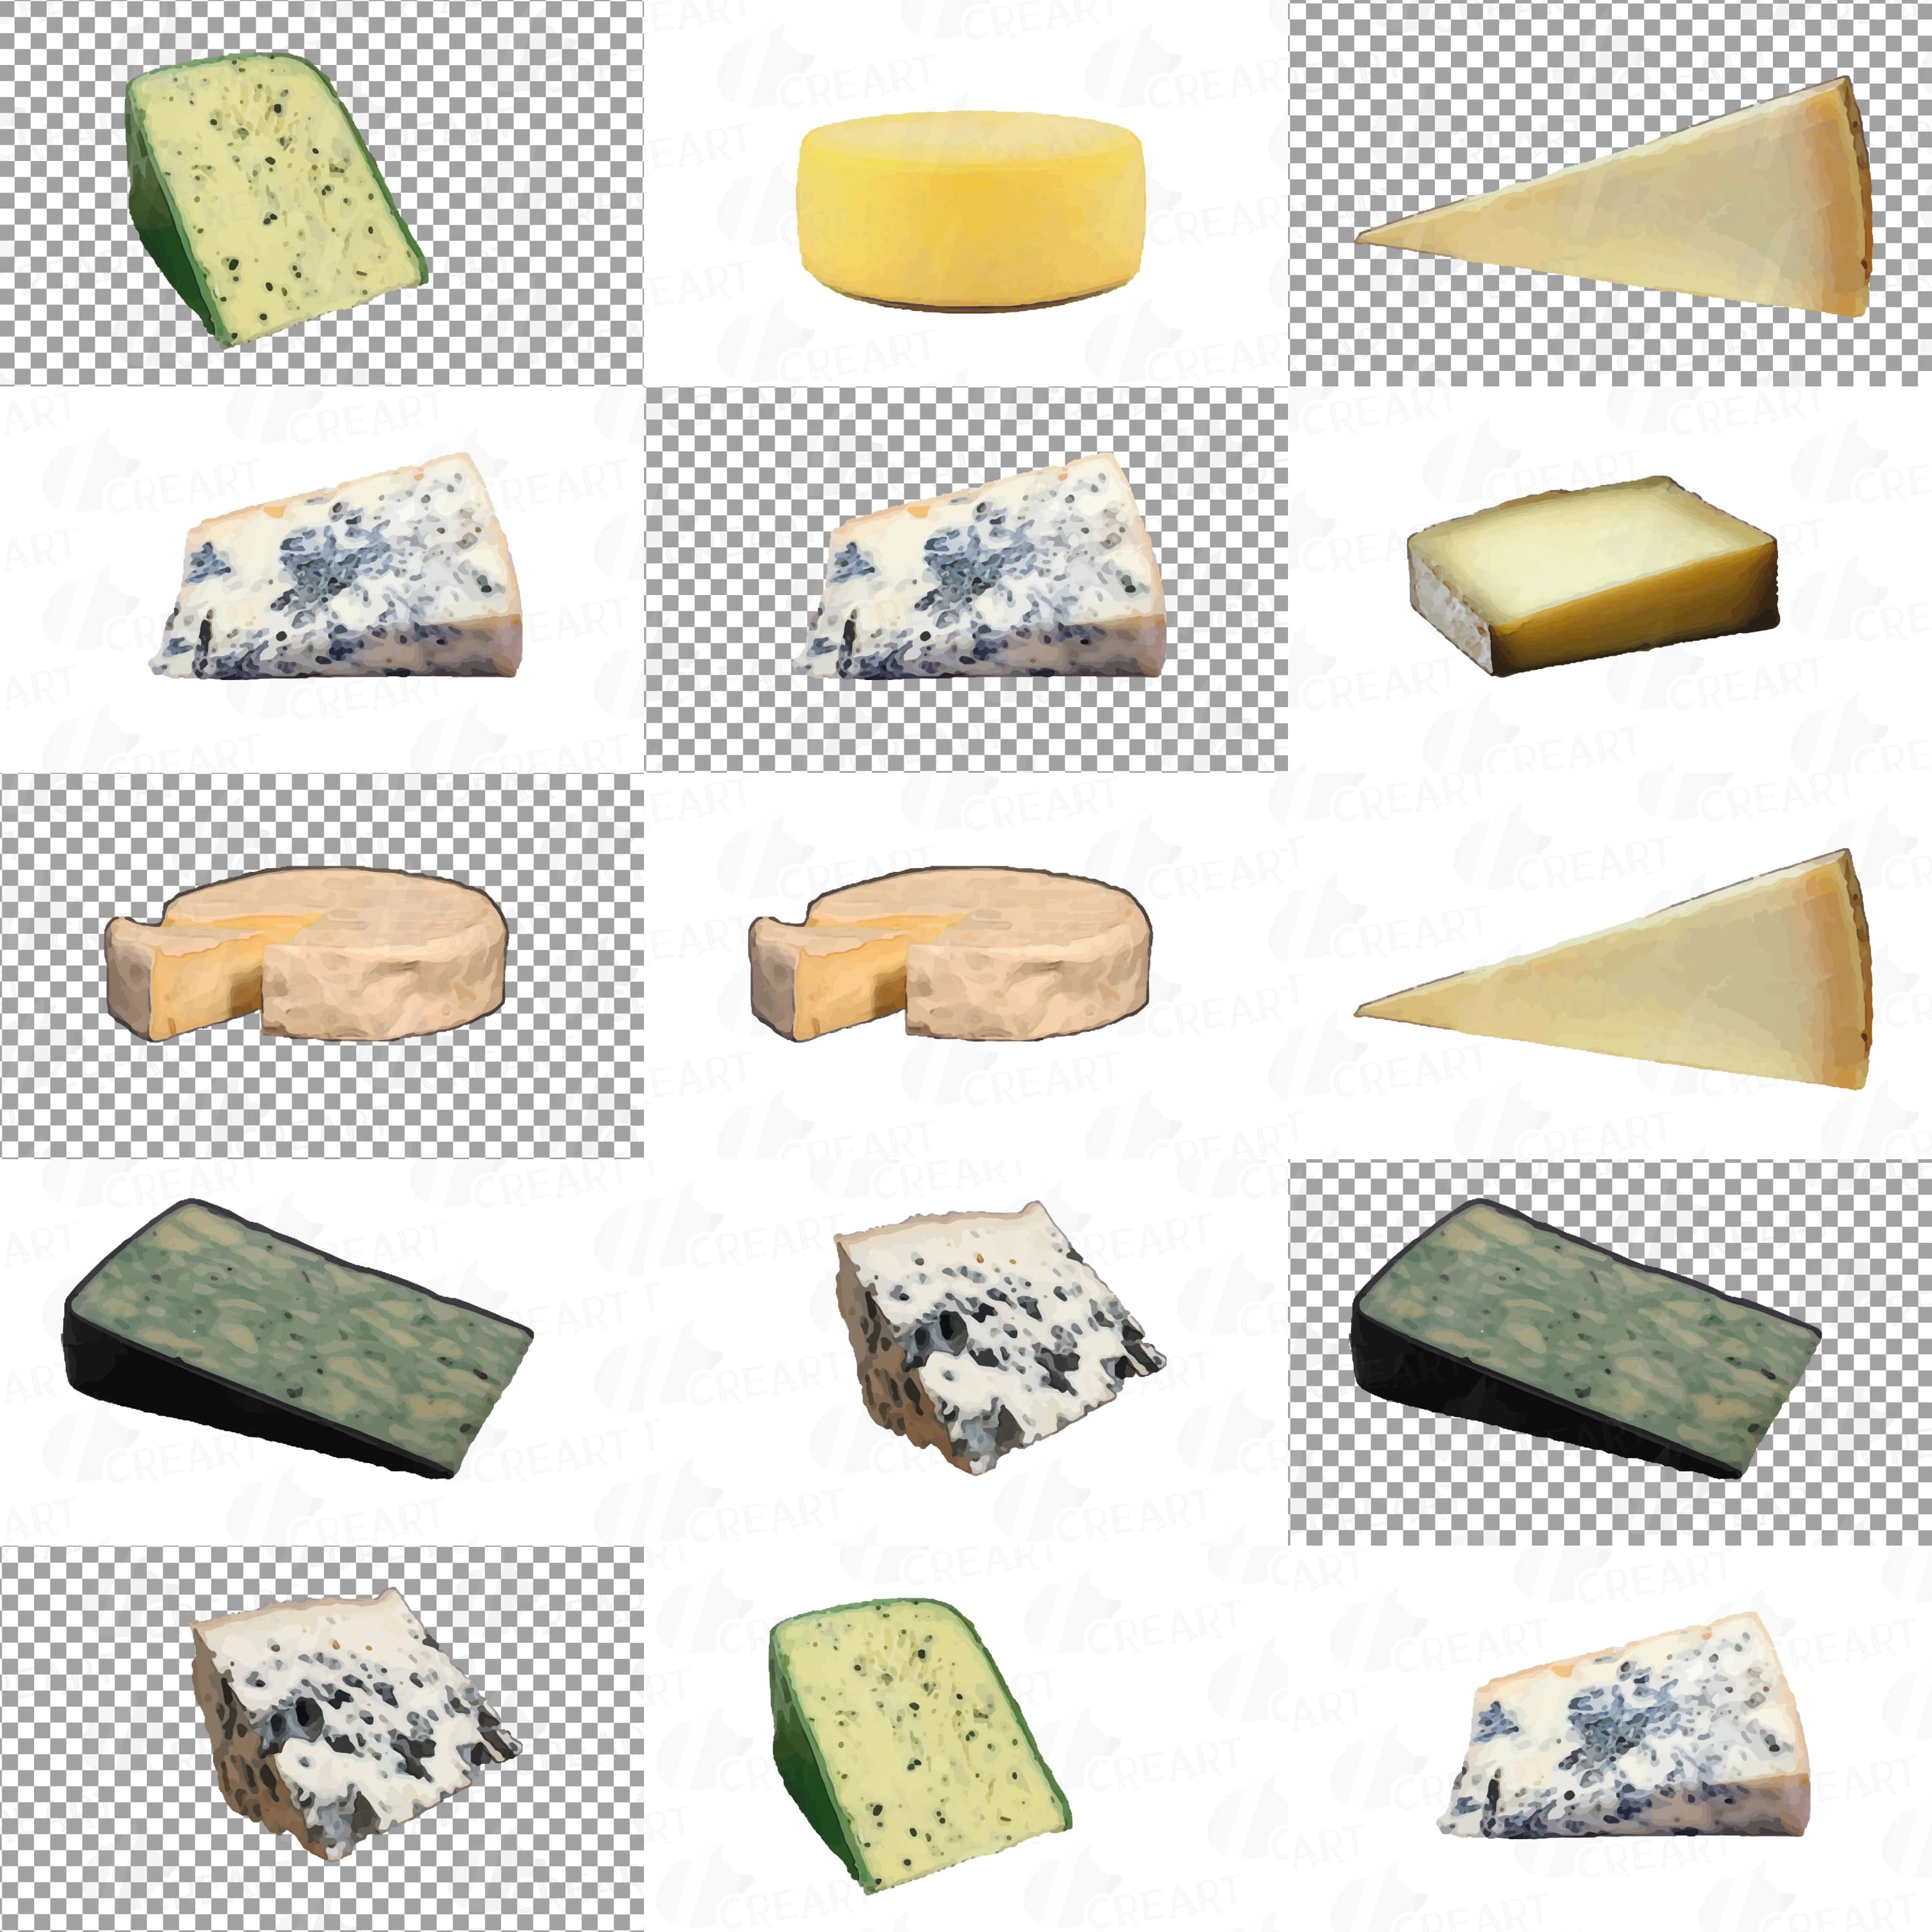 Collection of colorful images of hard cheese.